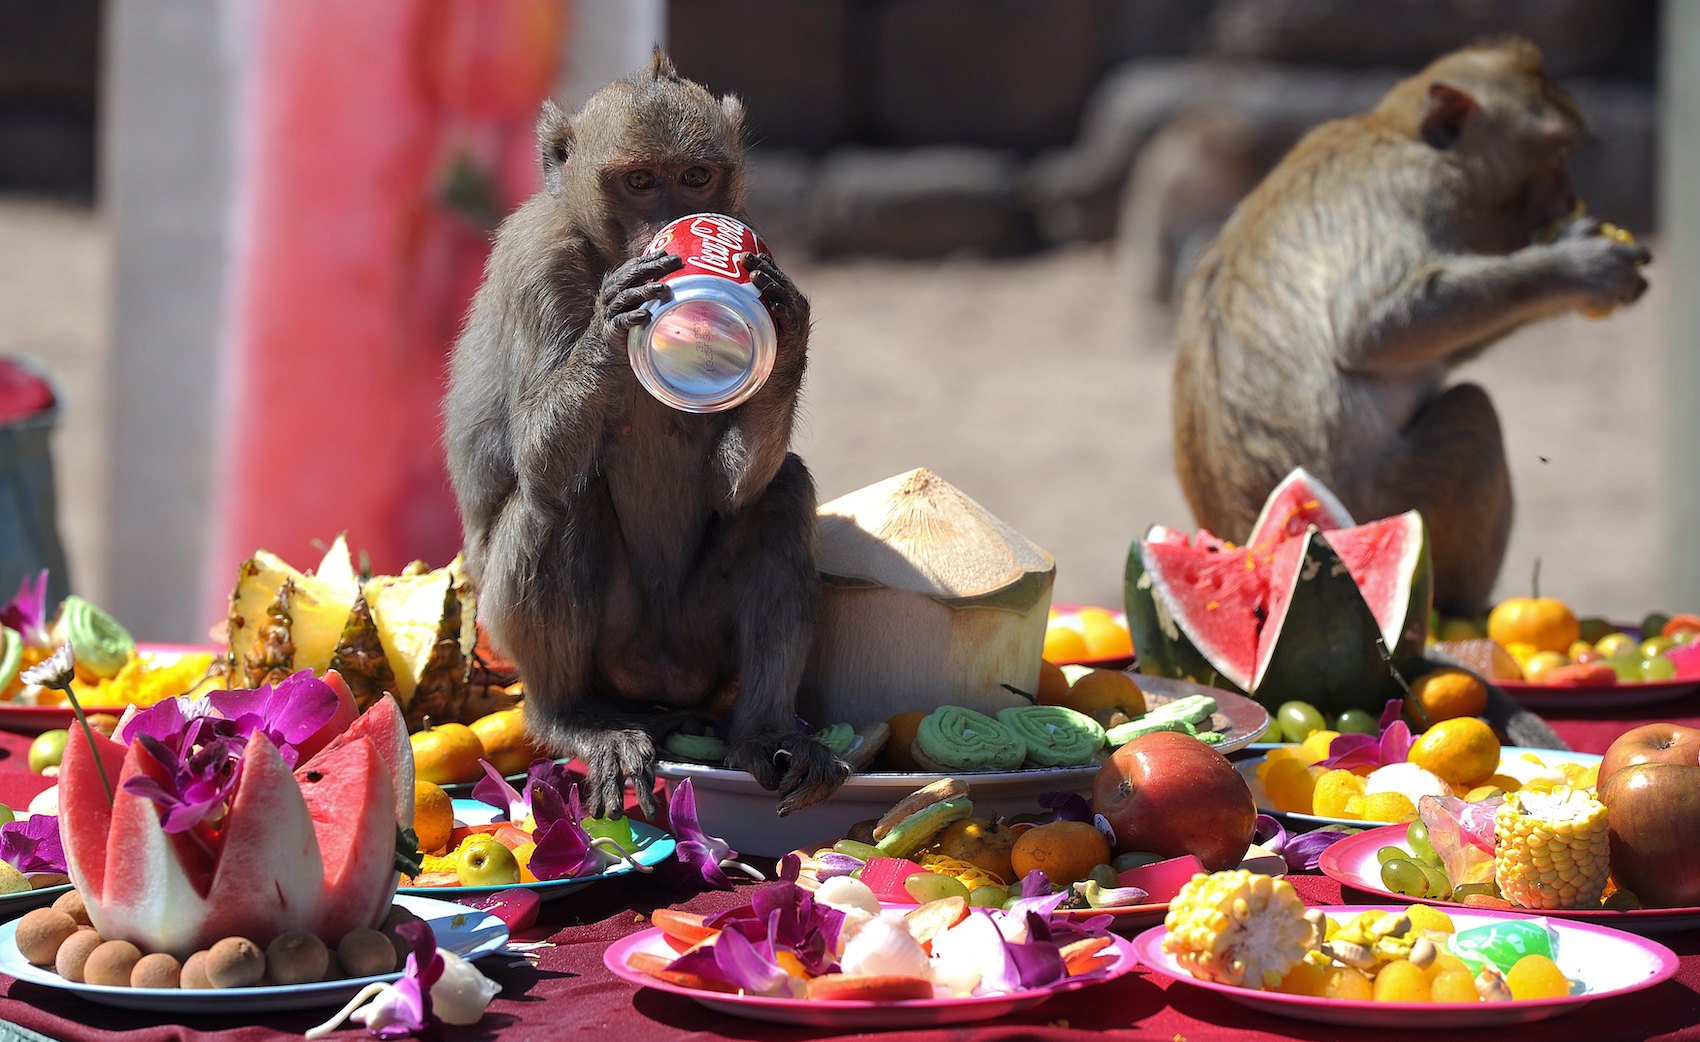 Monkeys eat fruit and drink soda in front of an ancient temple during the annual "monkey buffet" in Lopburi province, some 150 kms north of Bangkok on November 27, 2011.